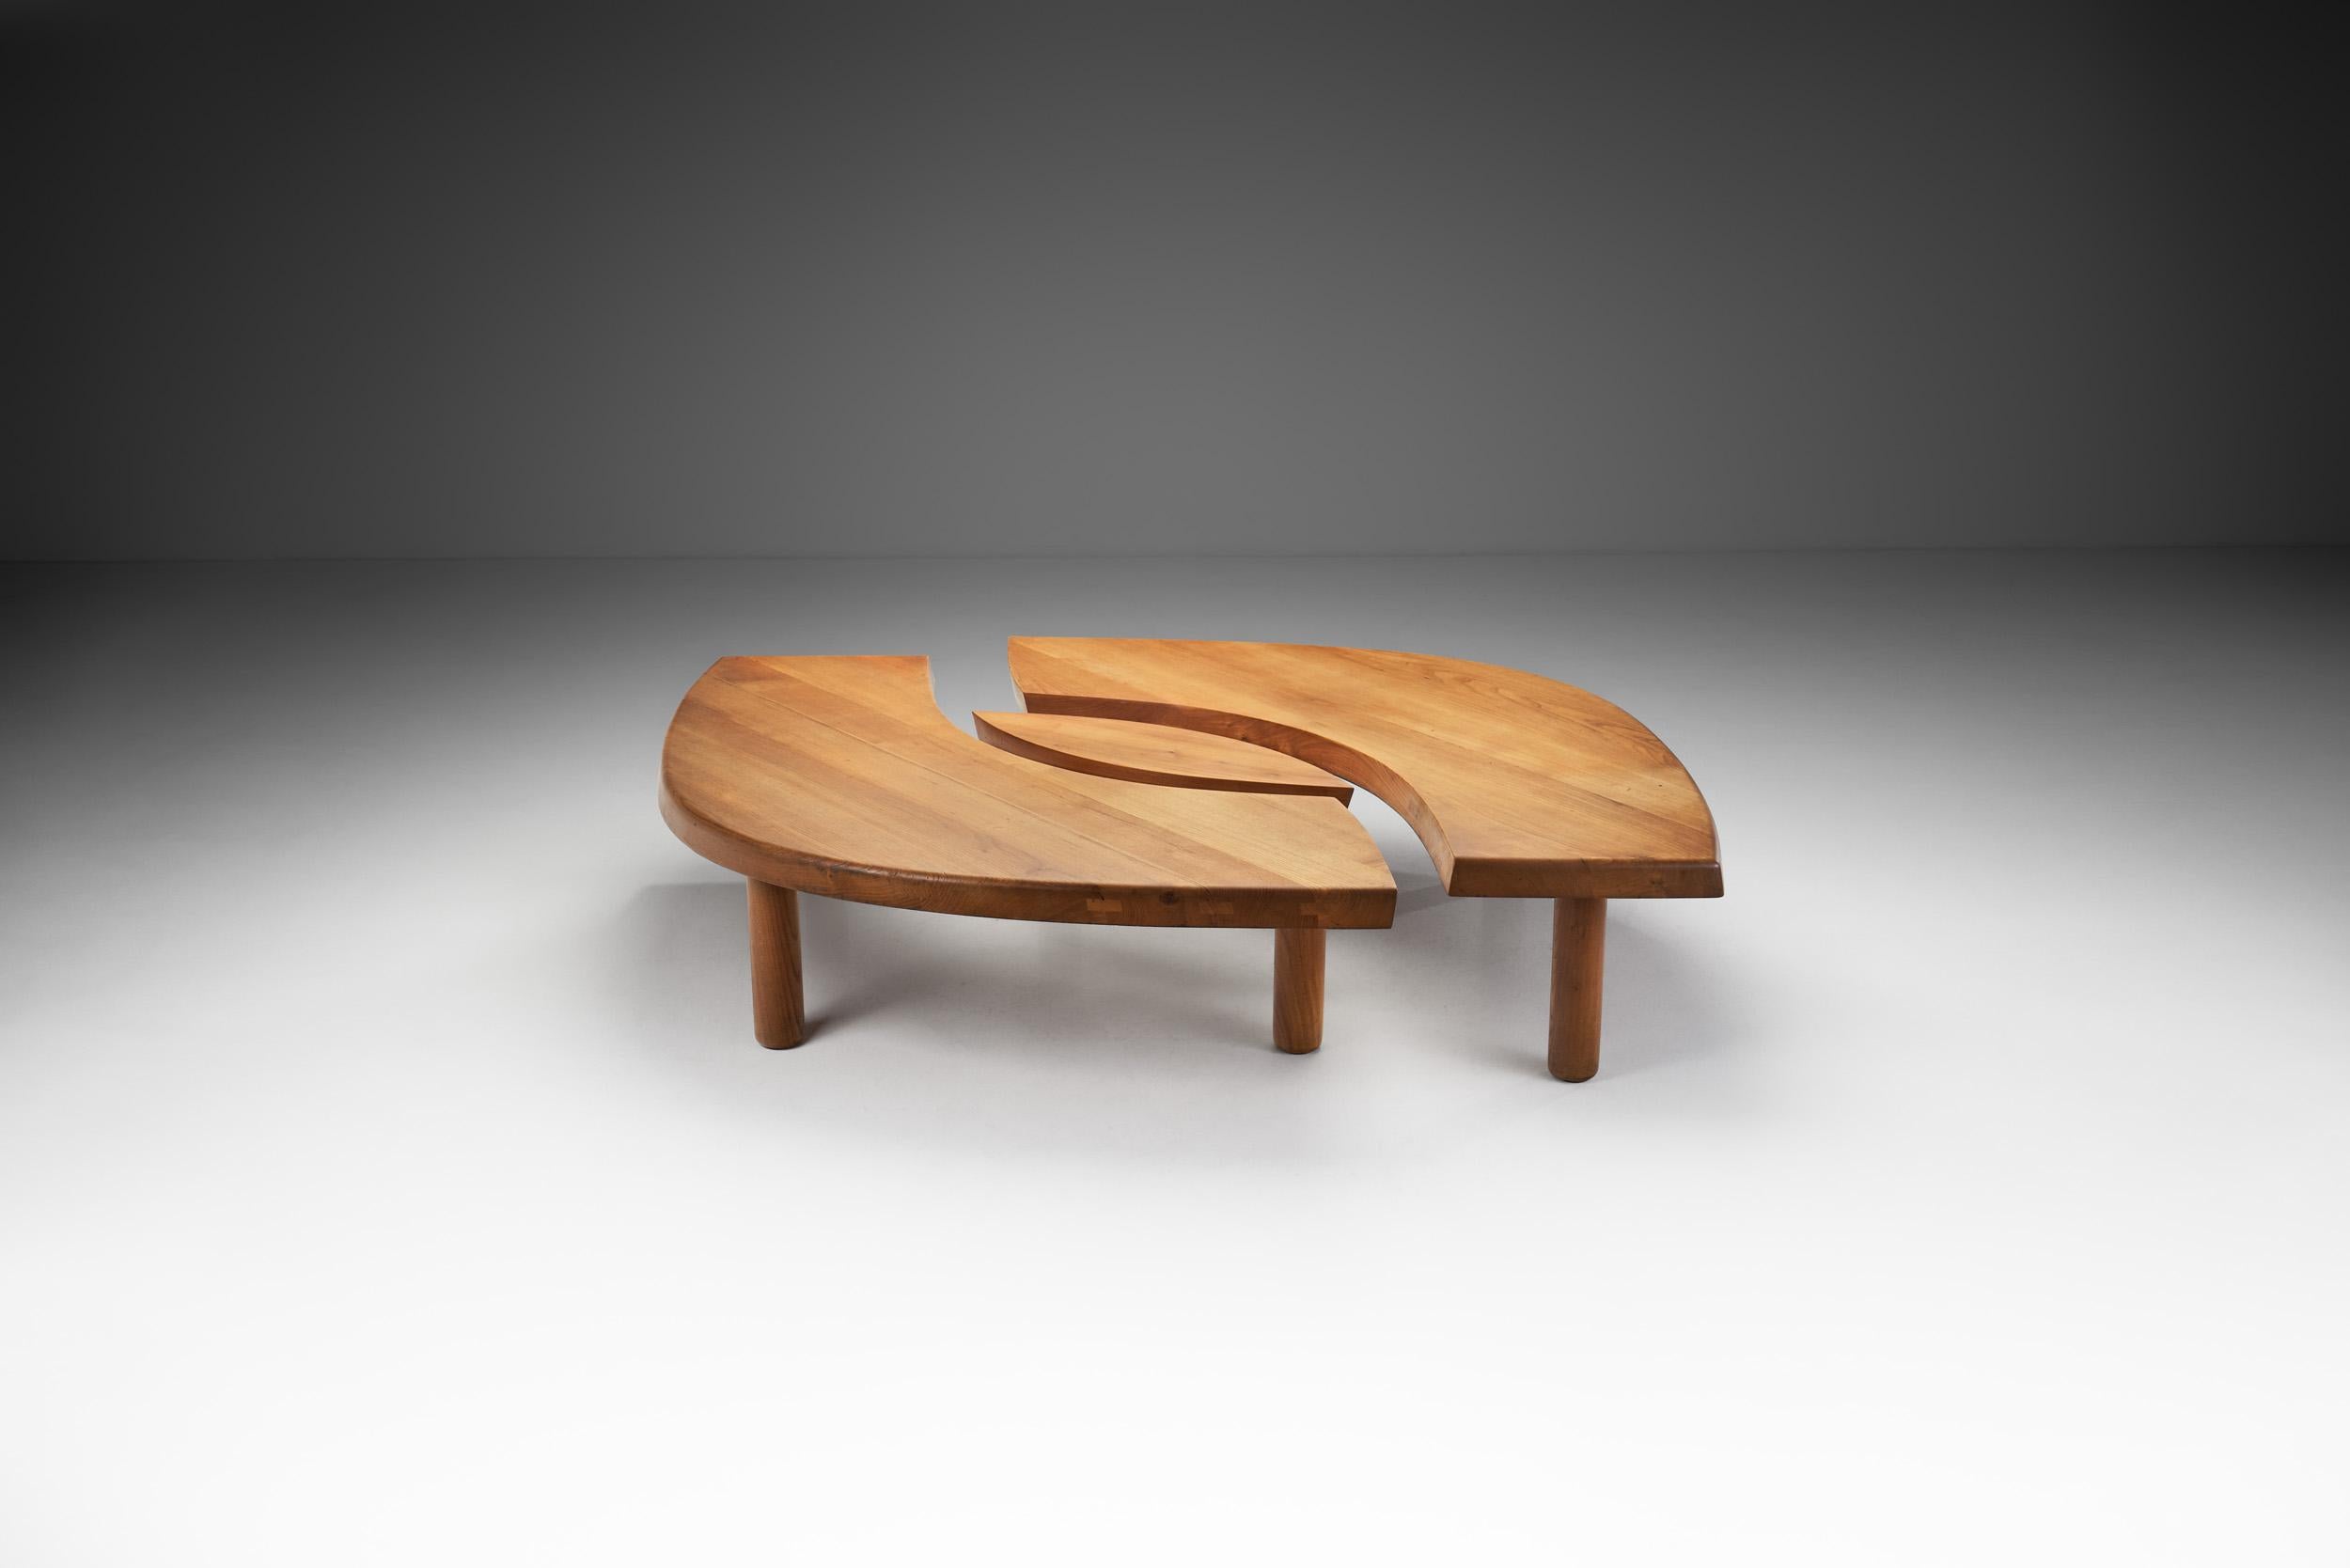 This peculiar table model is also referred to as the “Eye”. While the name doesn’t need explanation, the ingenious design certainly does. Pierre Chapo always paired his creative and elegant designs with impeccable craftsmanship that gained him